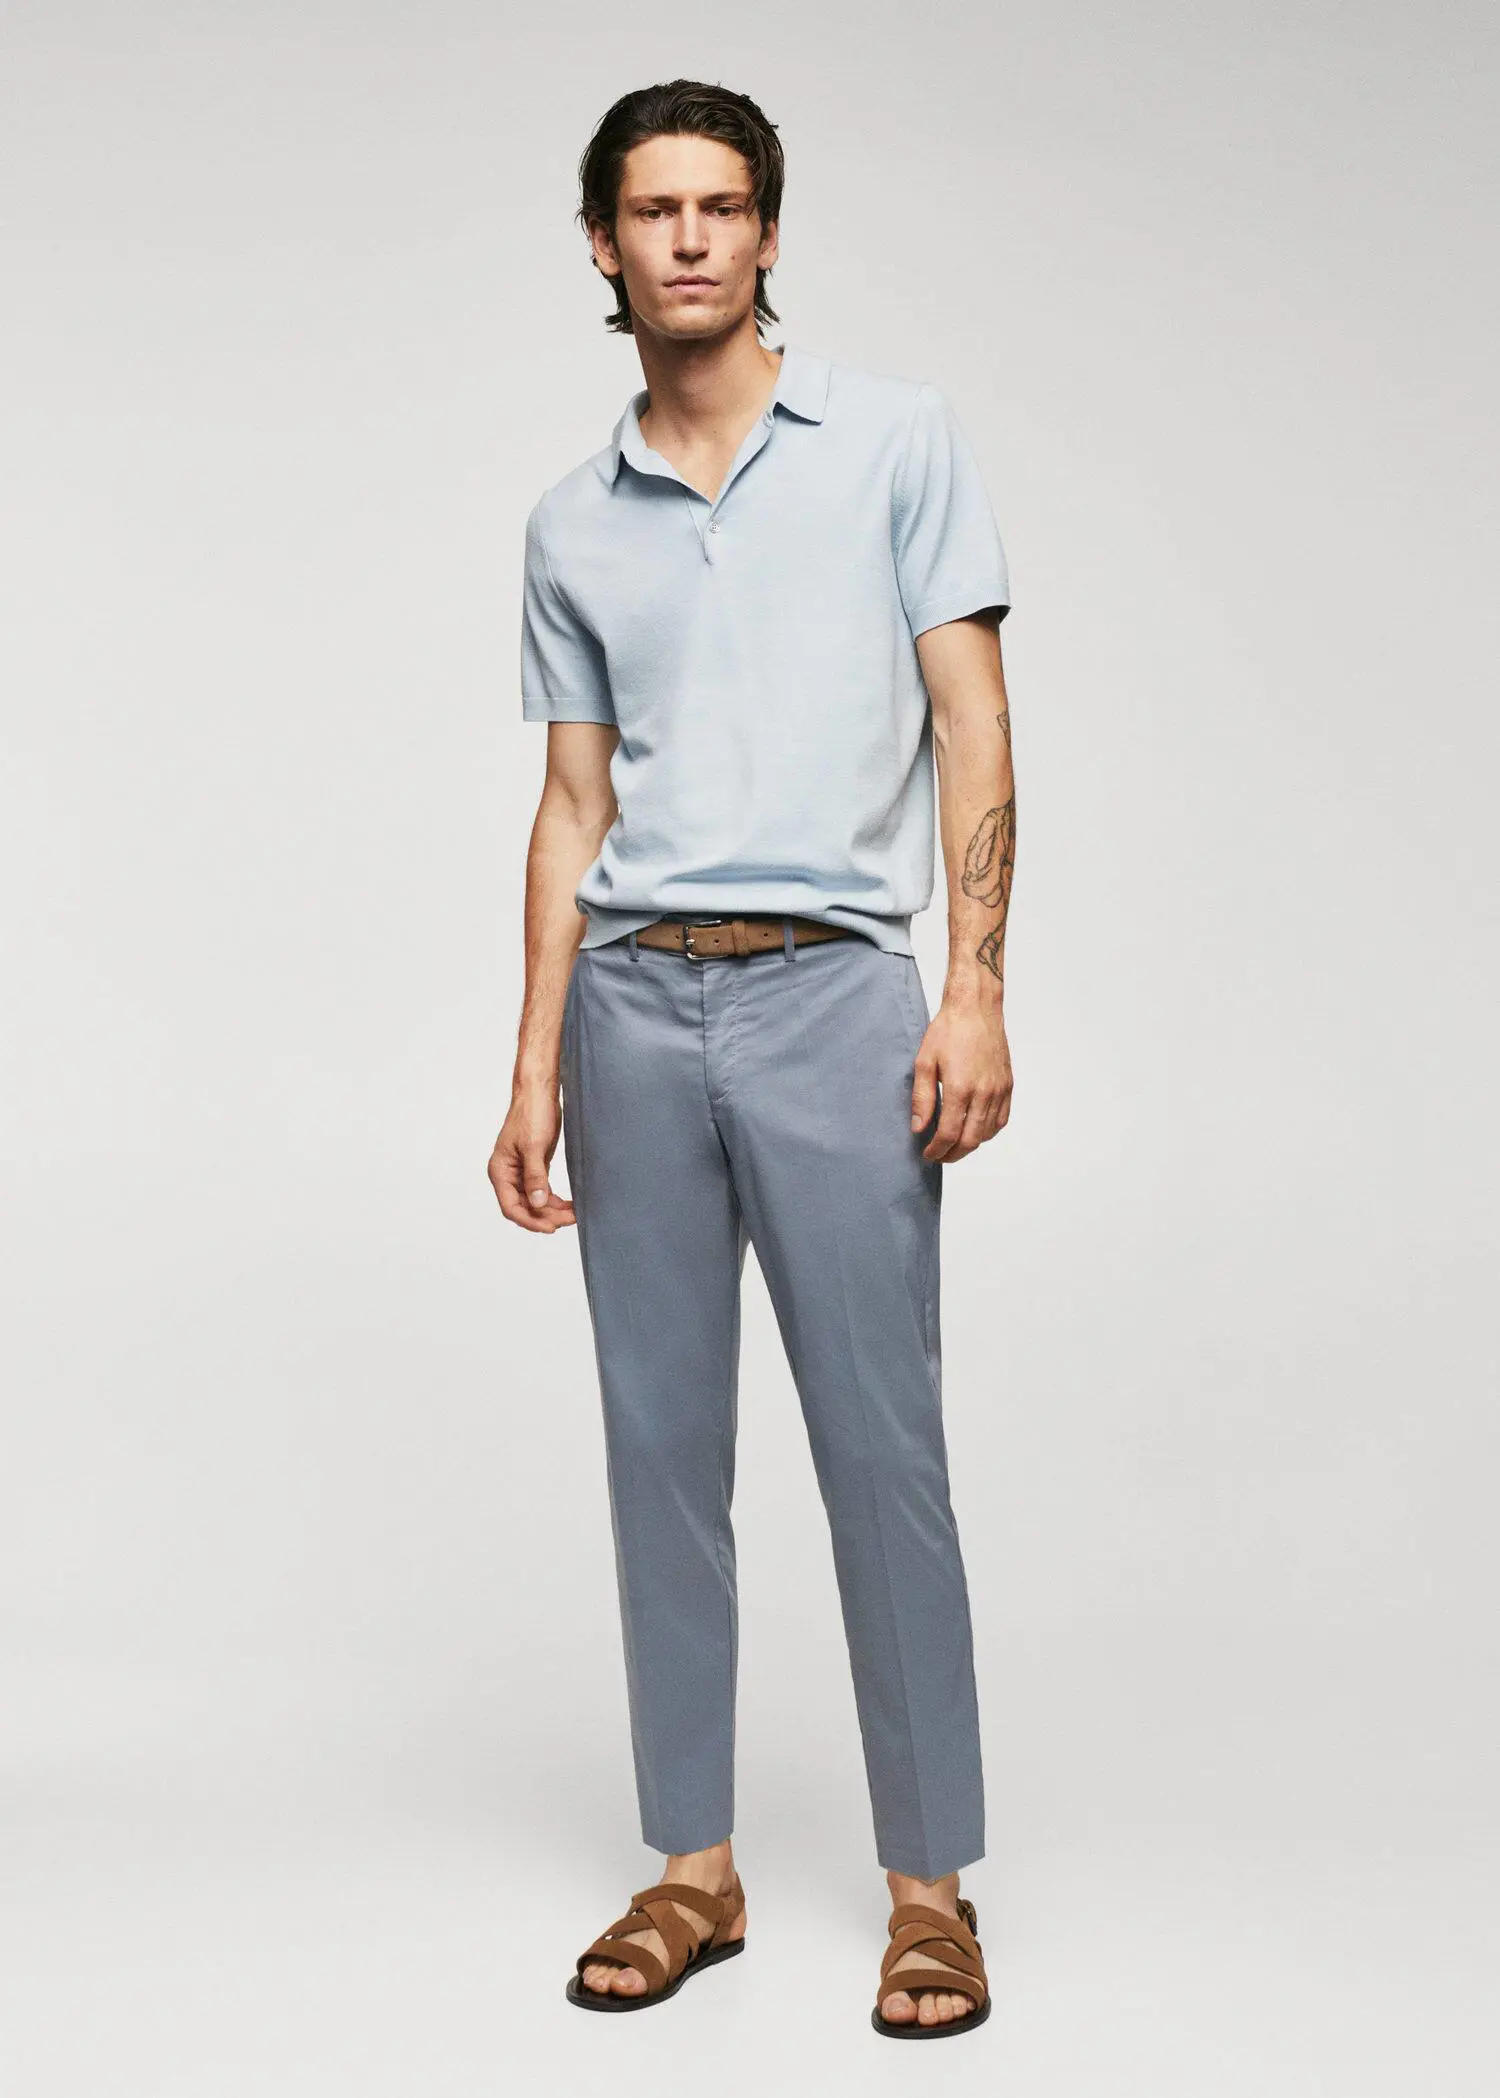 Mango Lightweight cotton trousers. a man in a light blue polo shirt and blue pants. 